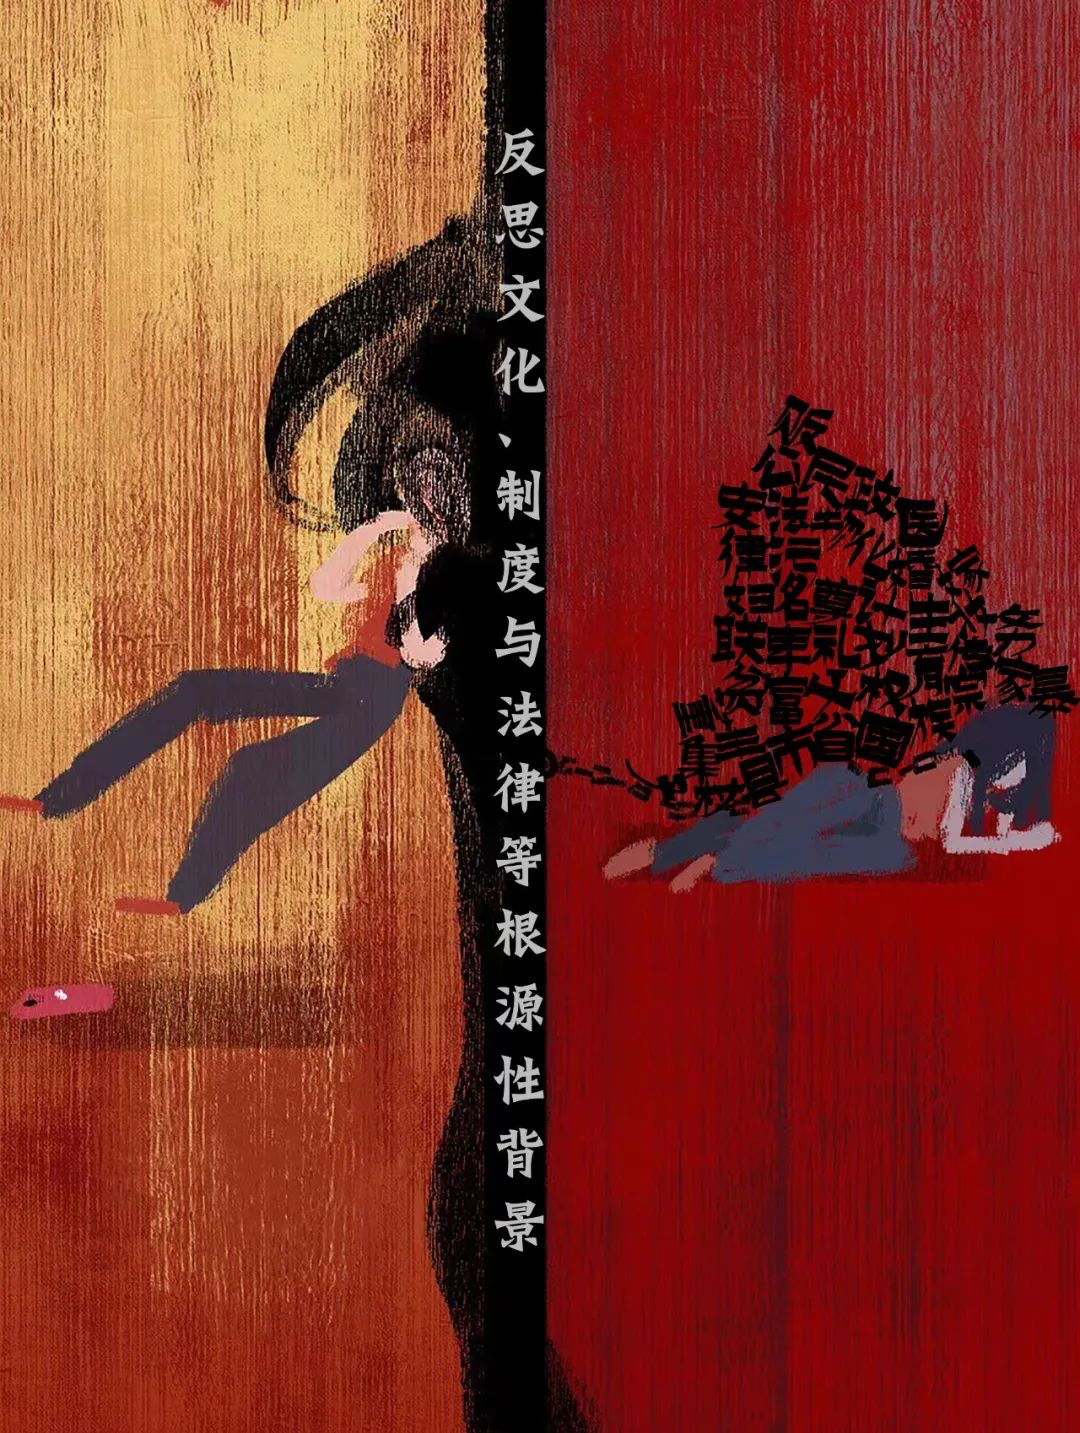 This poster depicts shadowy forces yanking a woman depicted on the left panel into the world of a chained woman on the right panel, who is being crushed by a mountain of words. 